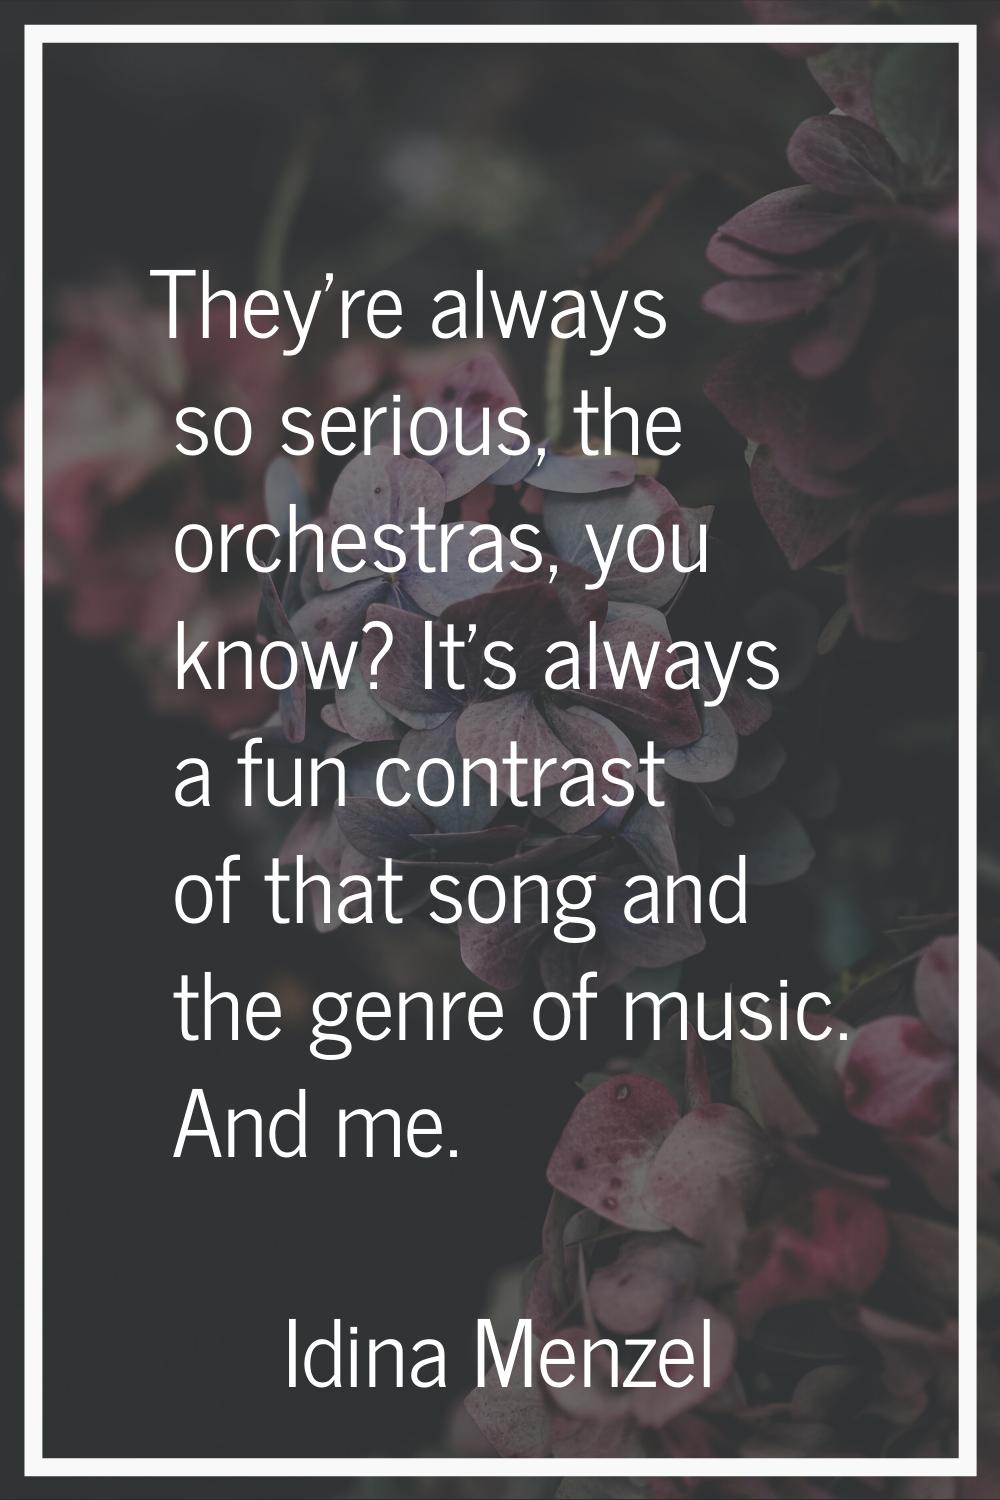 They're always so serious, the orchestras, you know? It's always a fun contrast of that song and th